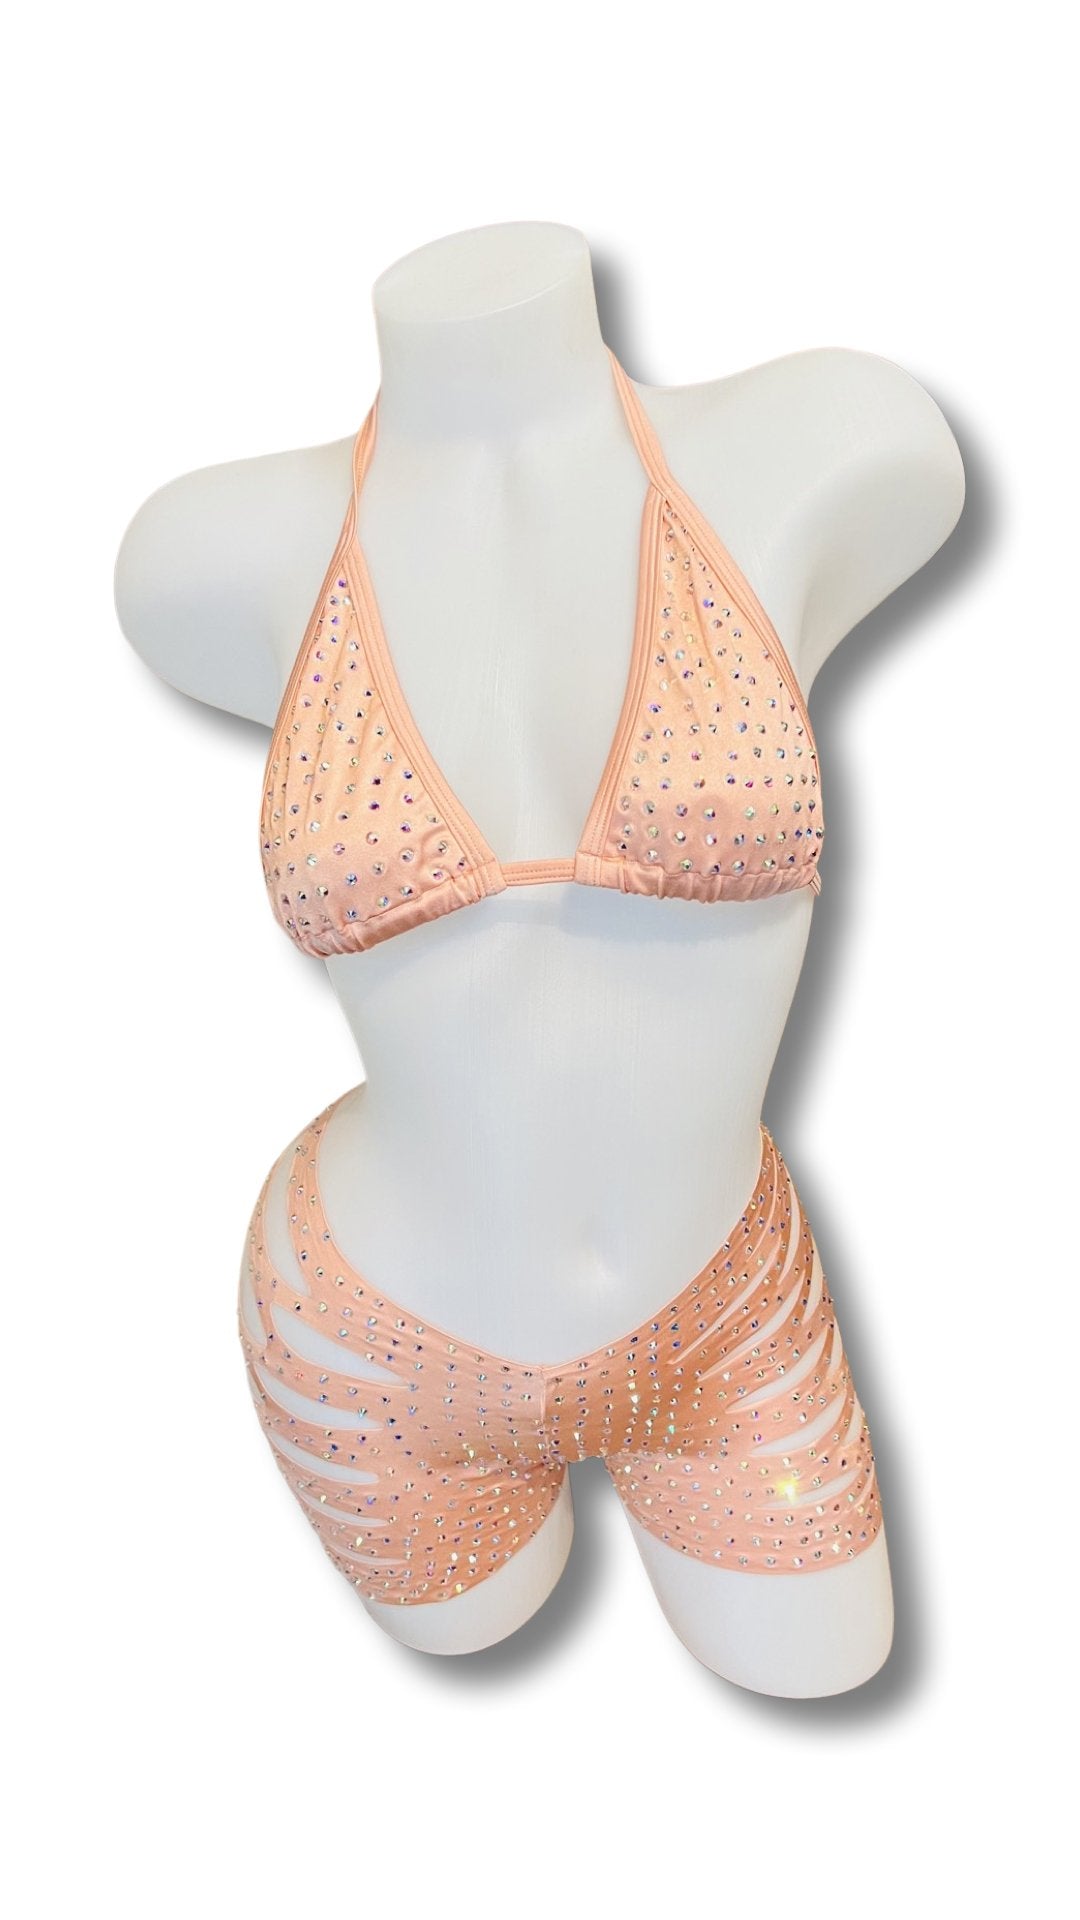 Rhinestone Triangle Top and Cut Out Short Set Rose PInk - Model Express VancouverBikini